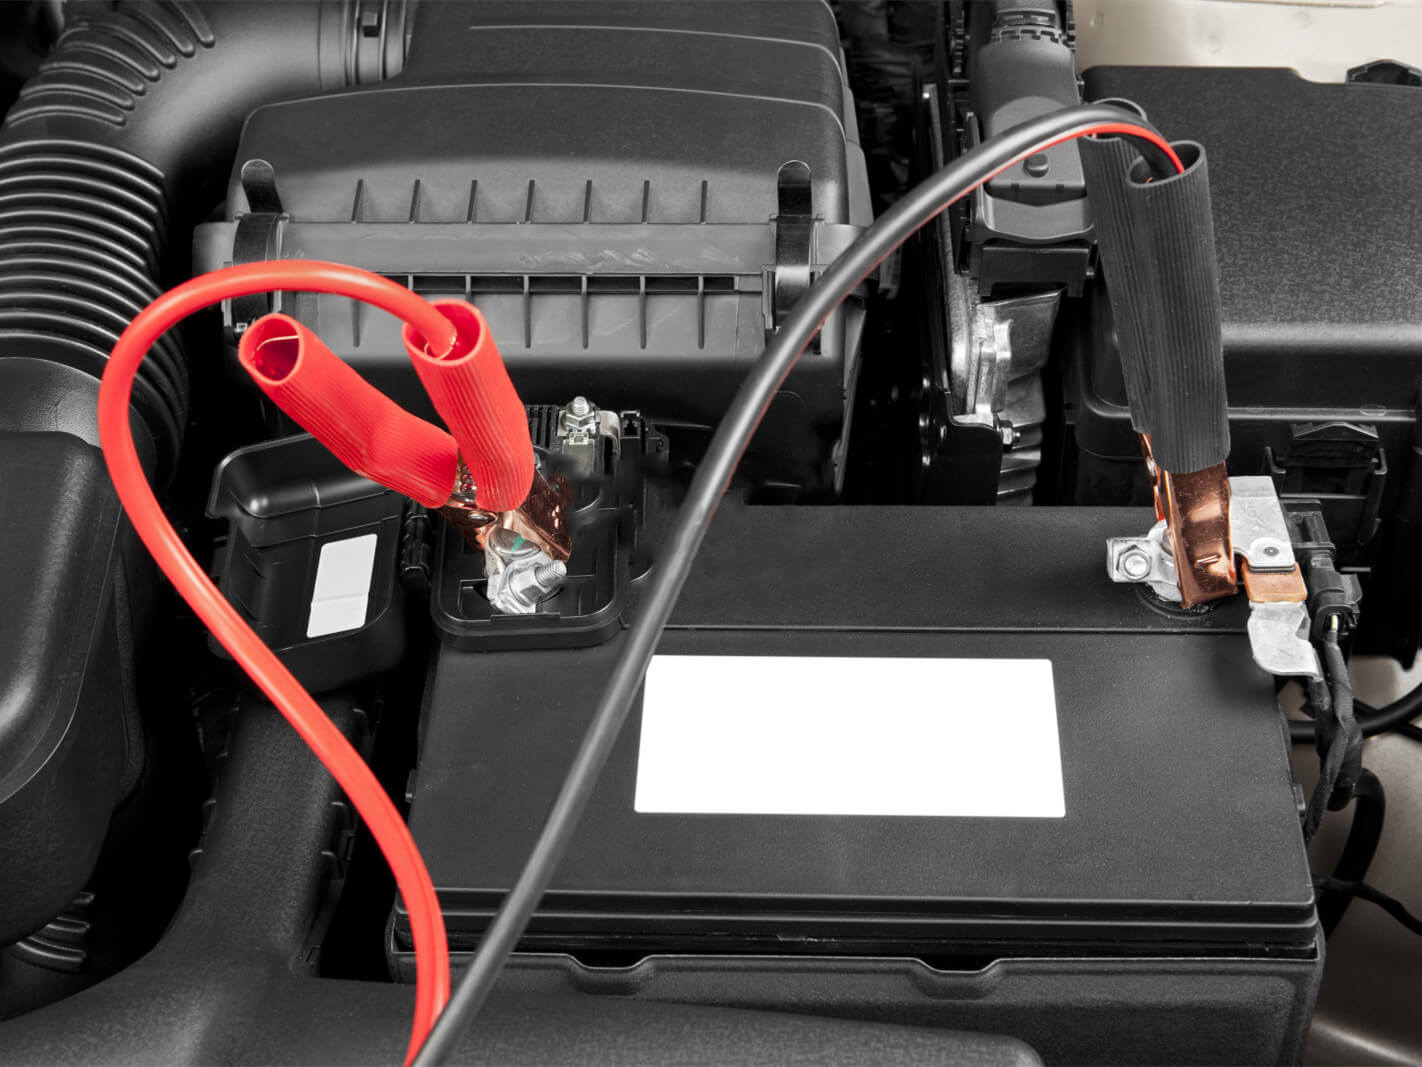 Will a Portable Jump Starter Damage My Car's Battery?